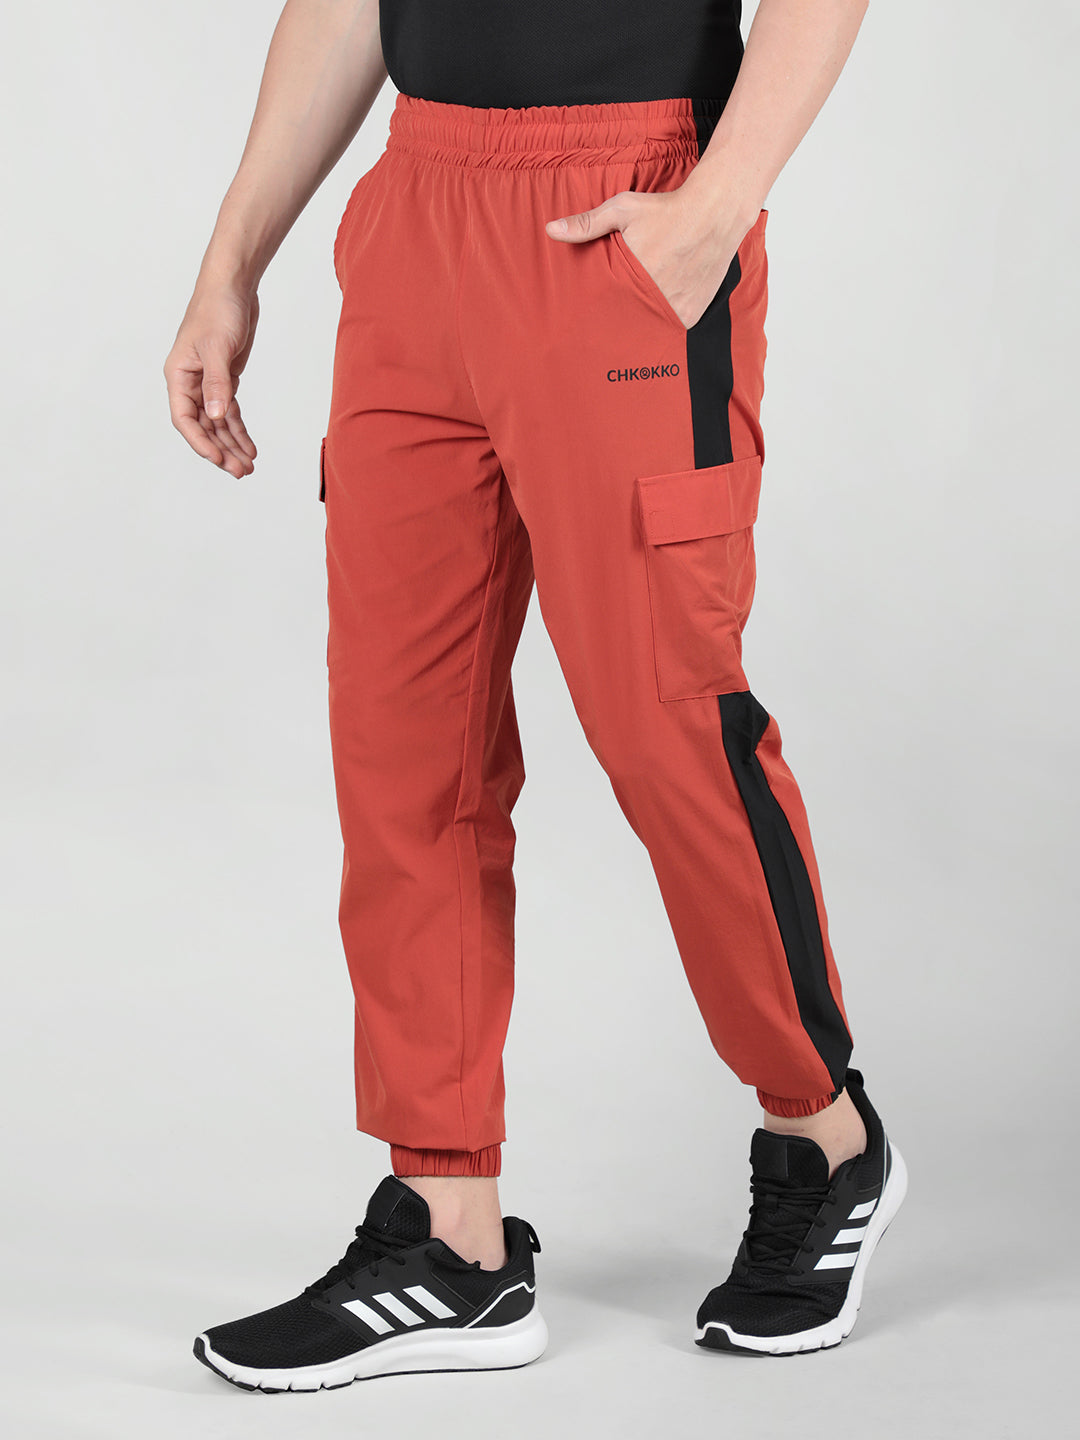 Ro Sports Track Pant Navy Blue Red